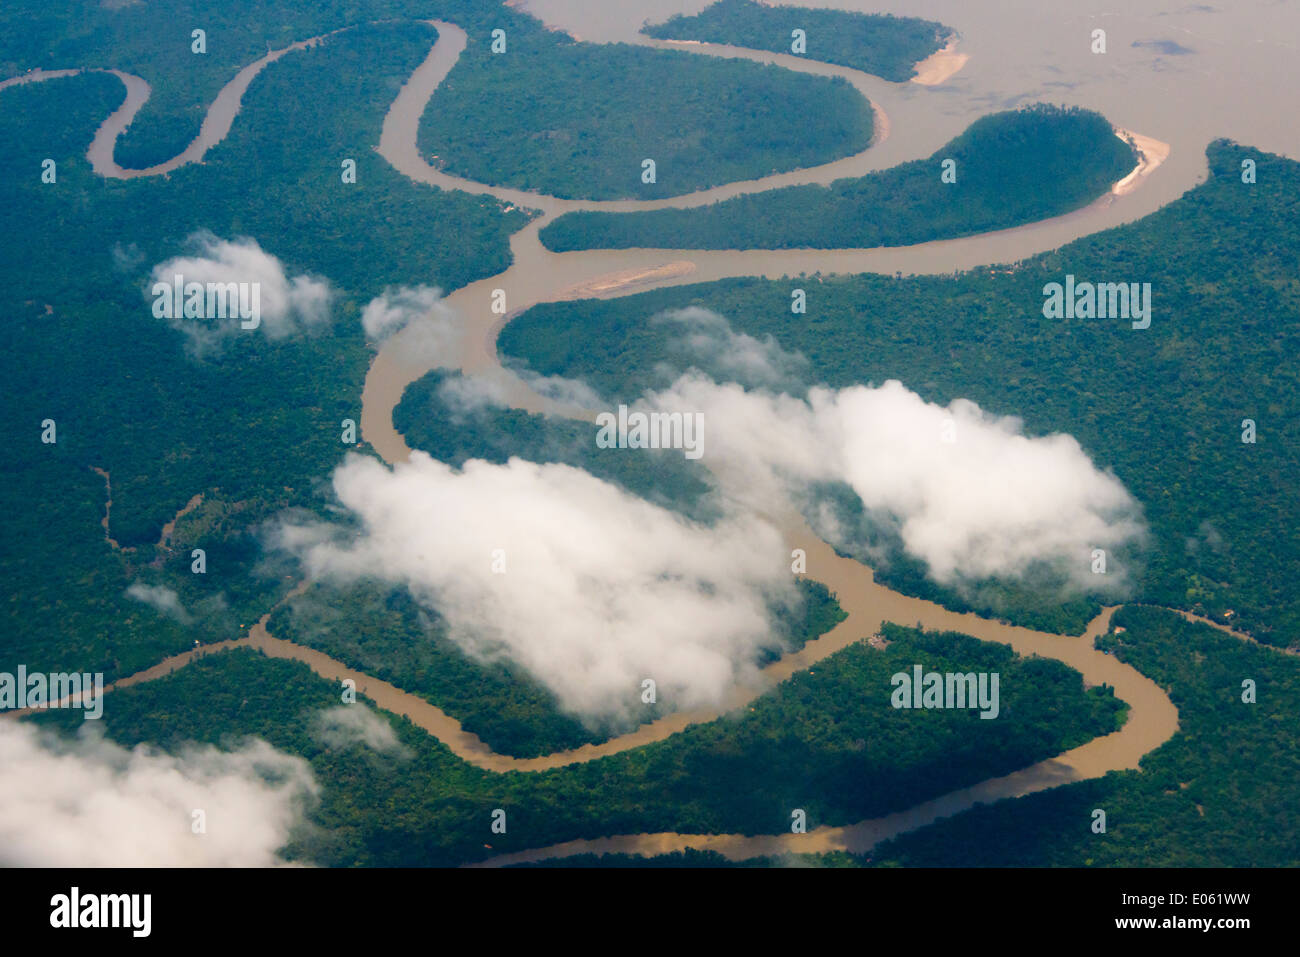 Aerial view of Amazon River, Para State, Brazil Stock Photo